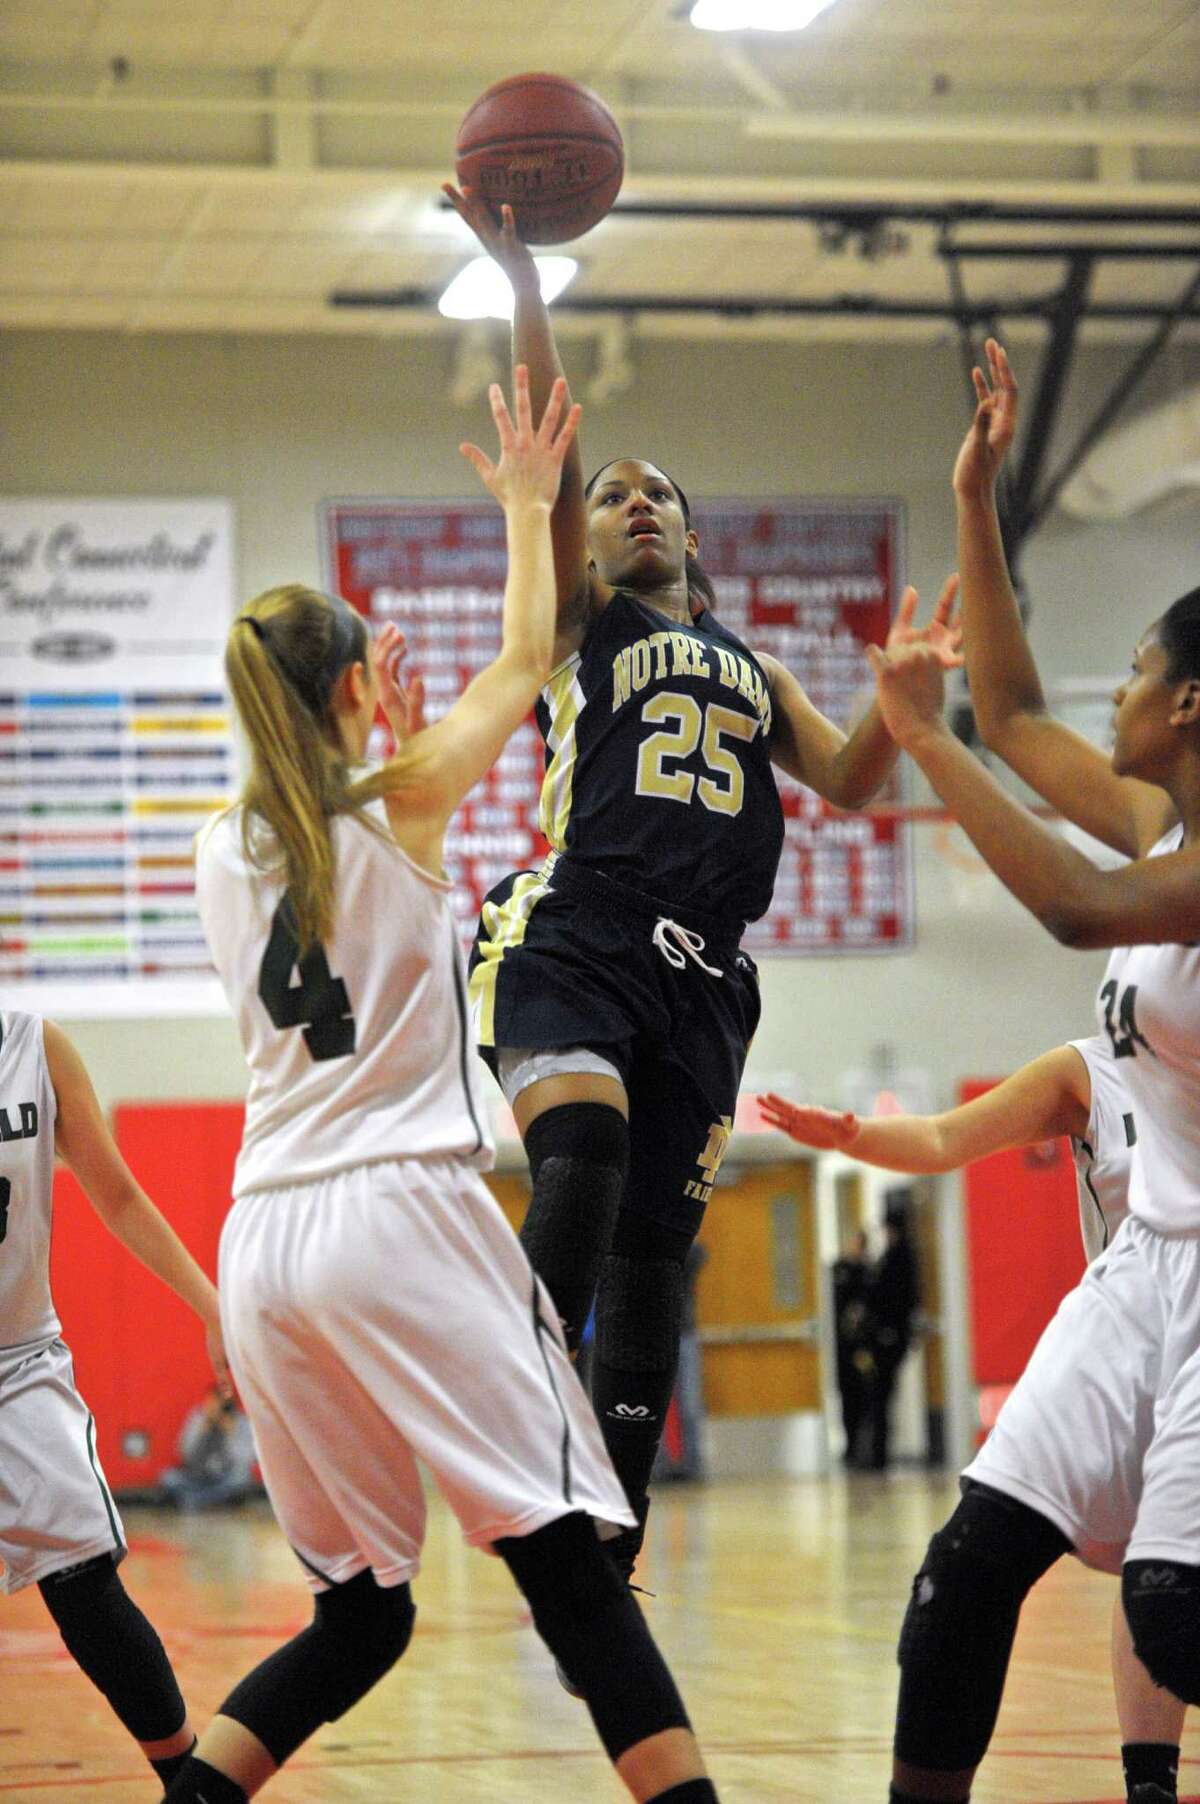 Notre Dame-Fairfield's Dayniera Artis (25) drives to the basket between Enfield's Erica Lovering (4) and Mary Baskerville (24) in the Connecticut Class-M girls semifinal basketball game between Notre Dame-Fairfield and Enfield high schools, on Friday night, March 11, 2016, at Berlin High School, Berlin, Conn.